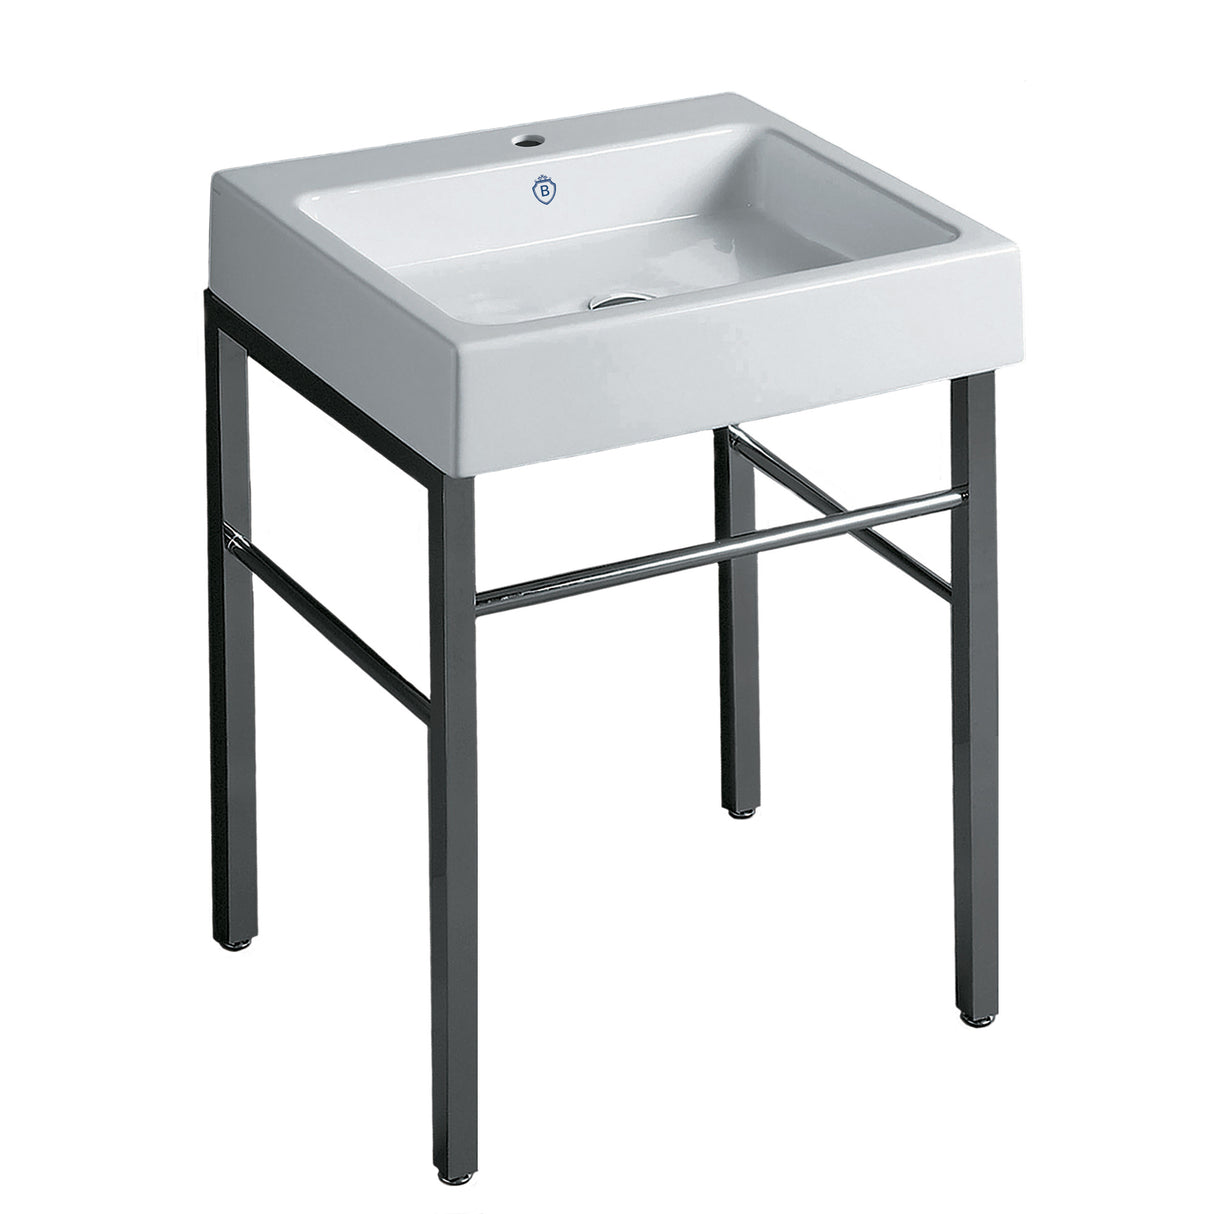 Britannia Rectangular Sink Console with Front Towel Bar and Single Faucet Hole Drill